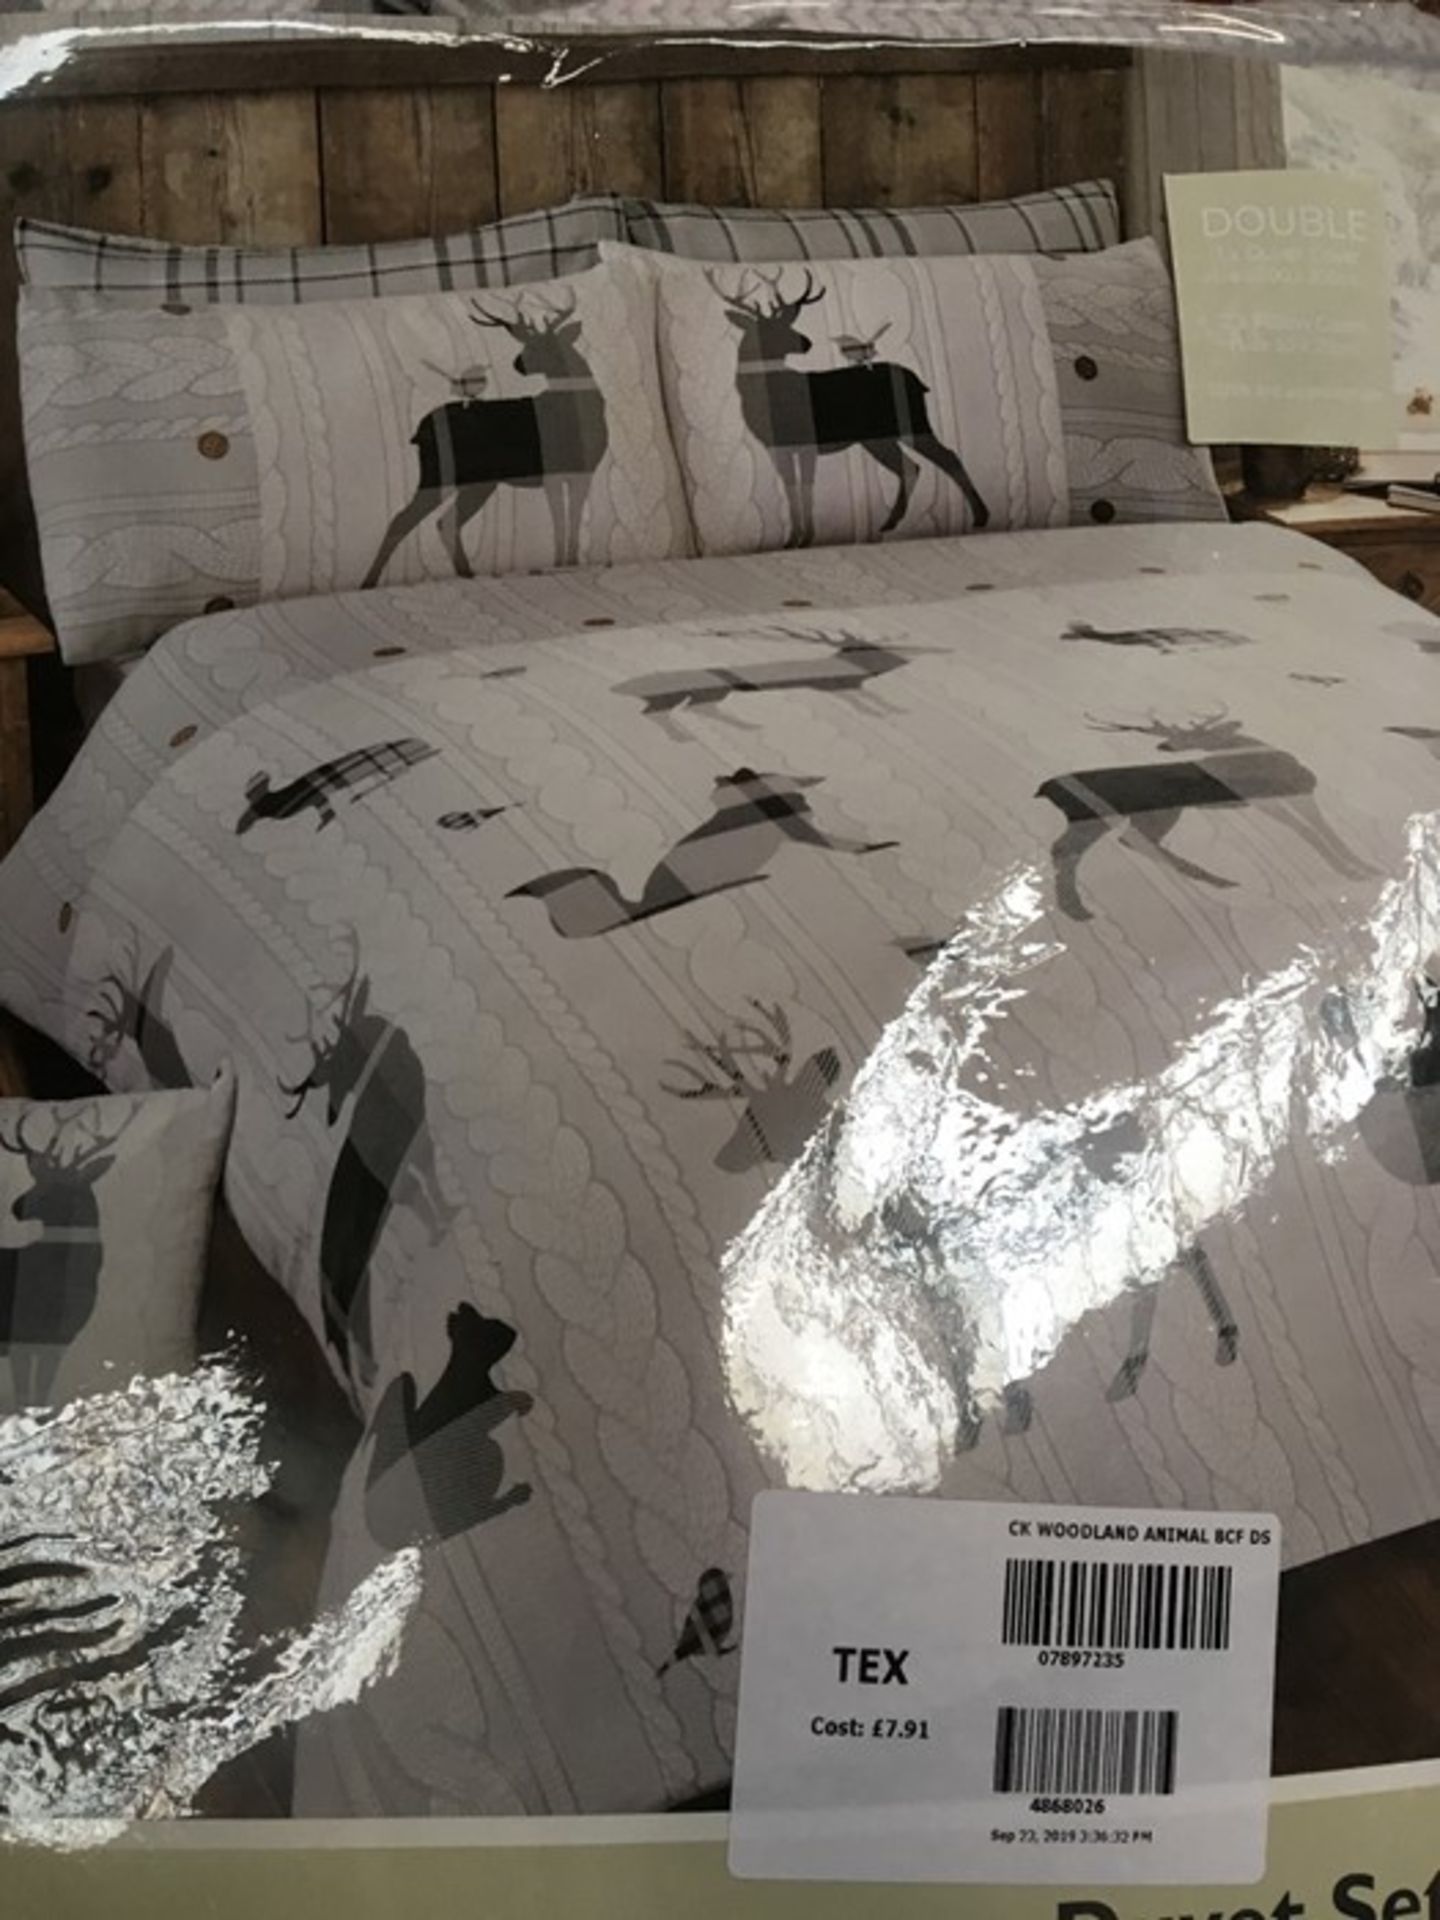 1 BAGGED CK WOODLAND ANIMAL DUVET SET IN WHITE AND GREY / SIZE 200 X 200CM (PUBLIC VIEWING